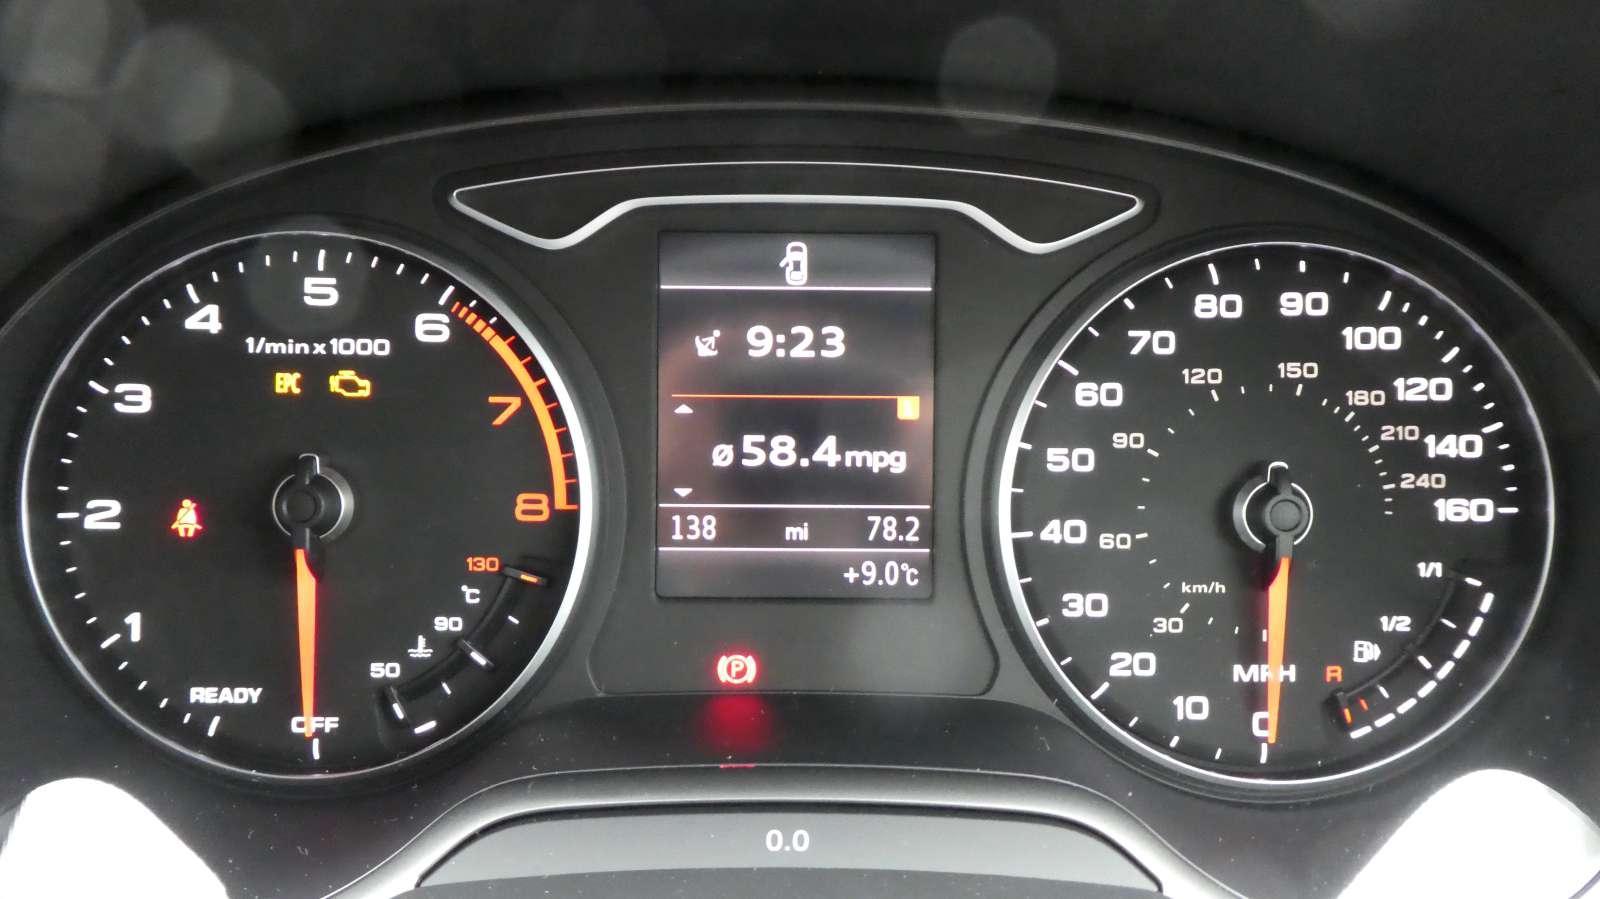 584mpg after collected 2019 1600